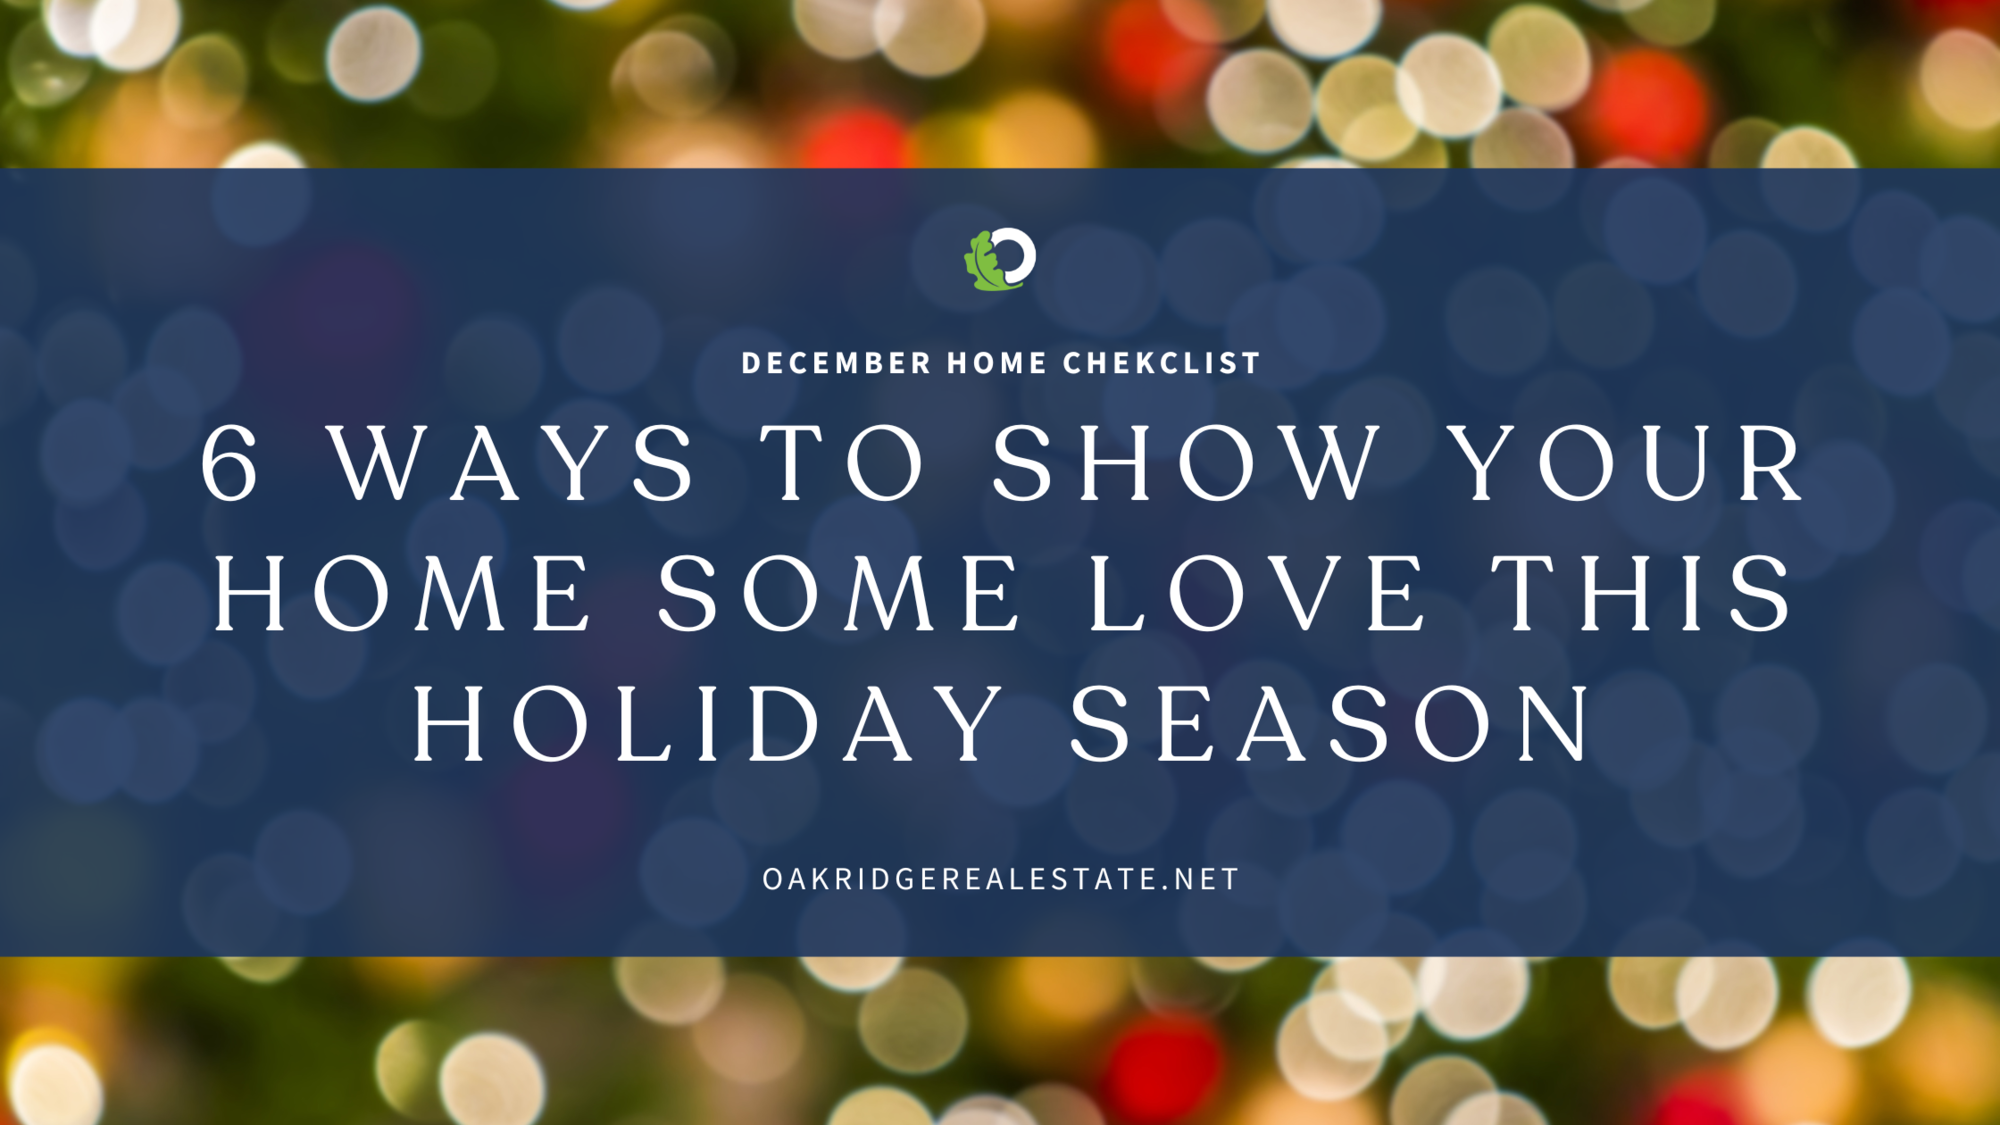 6 Ways to Show Your Home Some Love this Holiday Season | Oakridge Real Estate